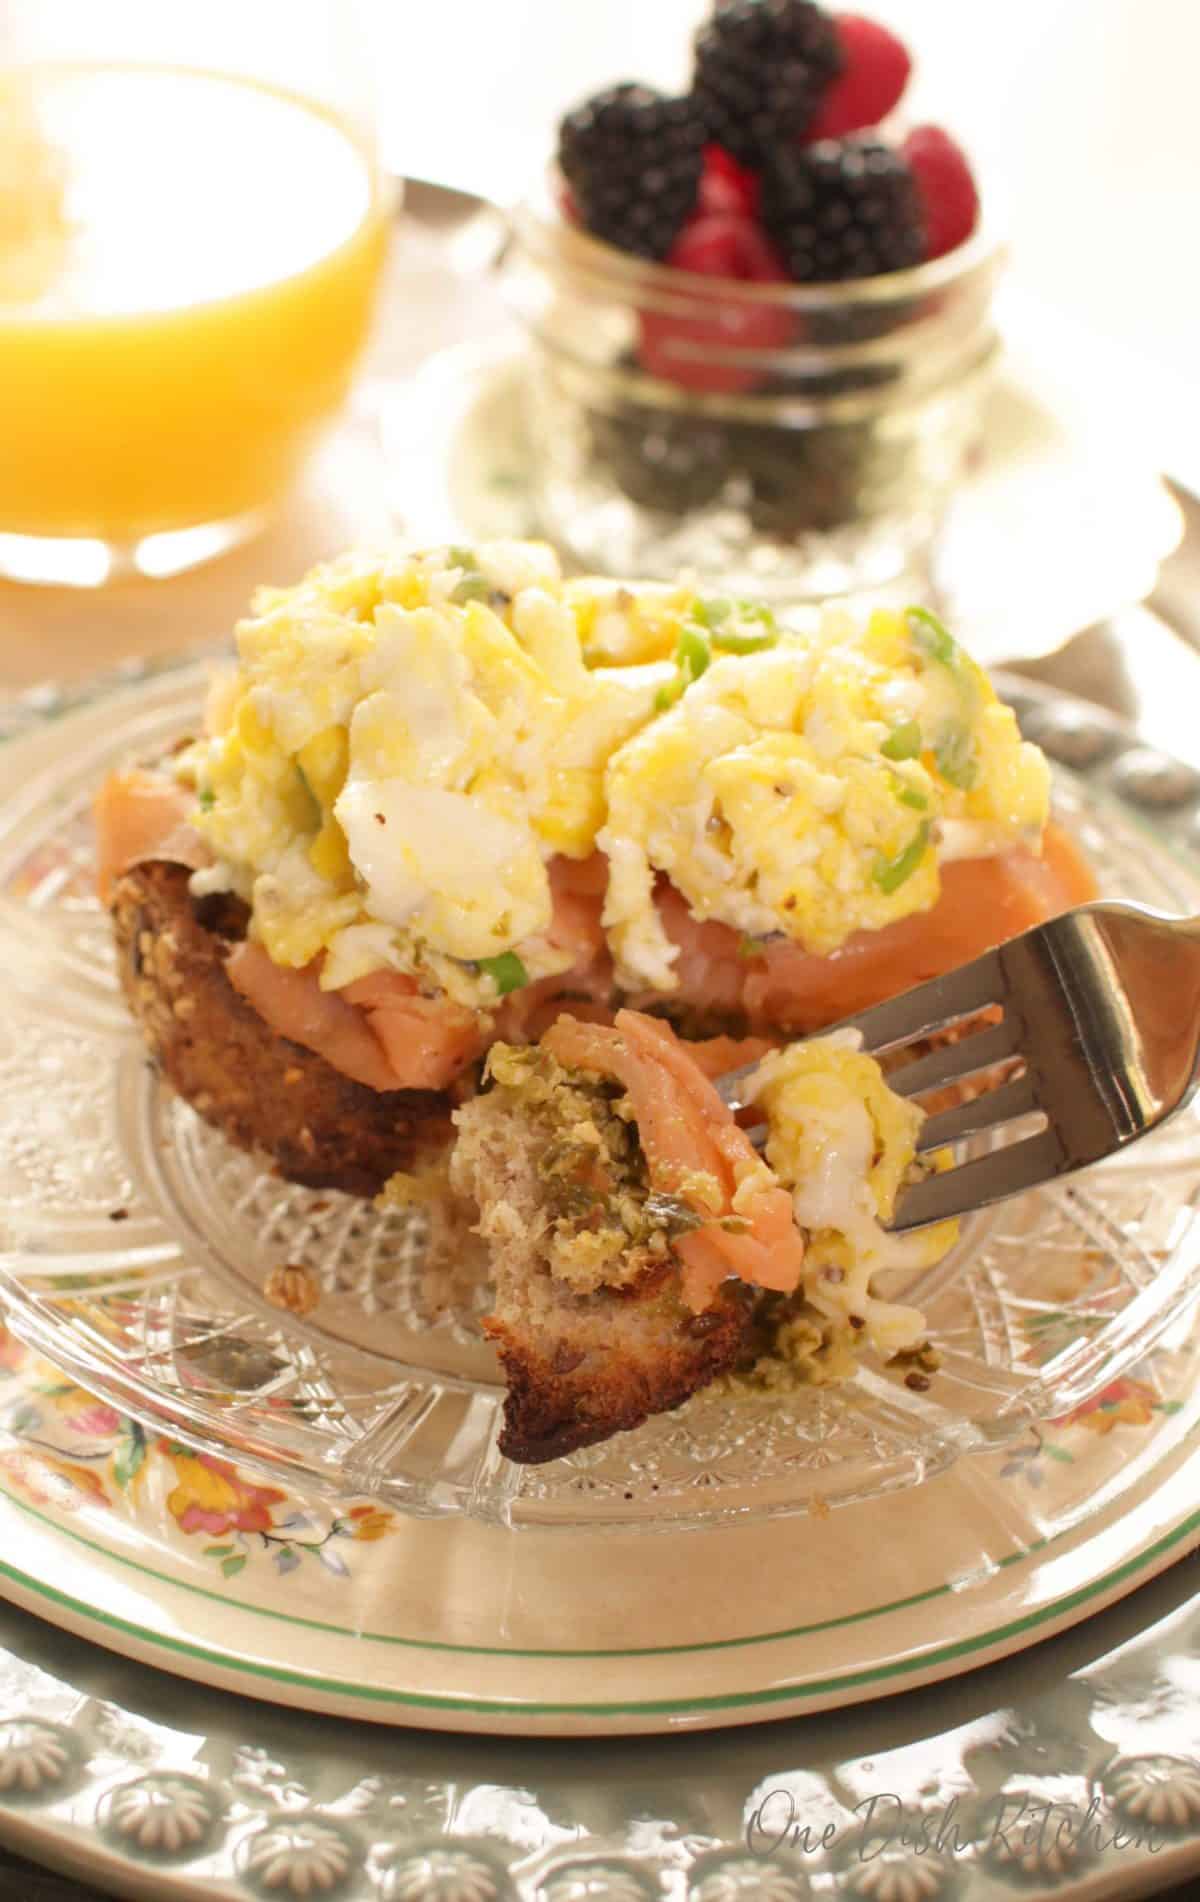 A closeup of a forkful of french bread topped with smoked salmon, pesto, and scrambled eggs next to a glass of orange juice and a jar of blackberries and raspberries